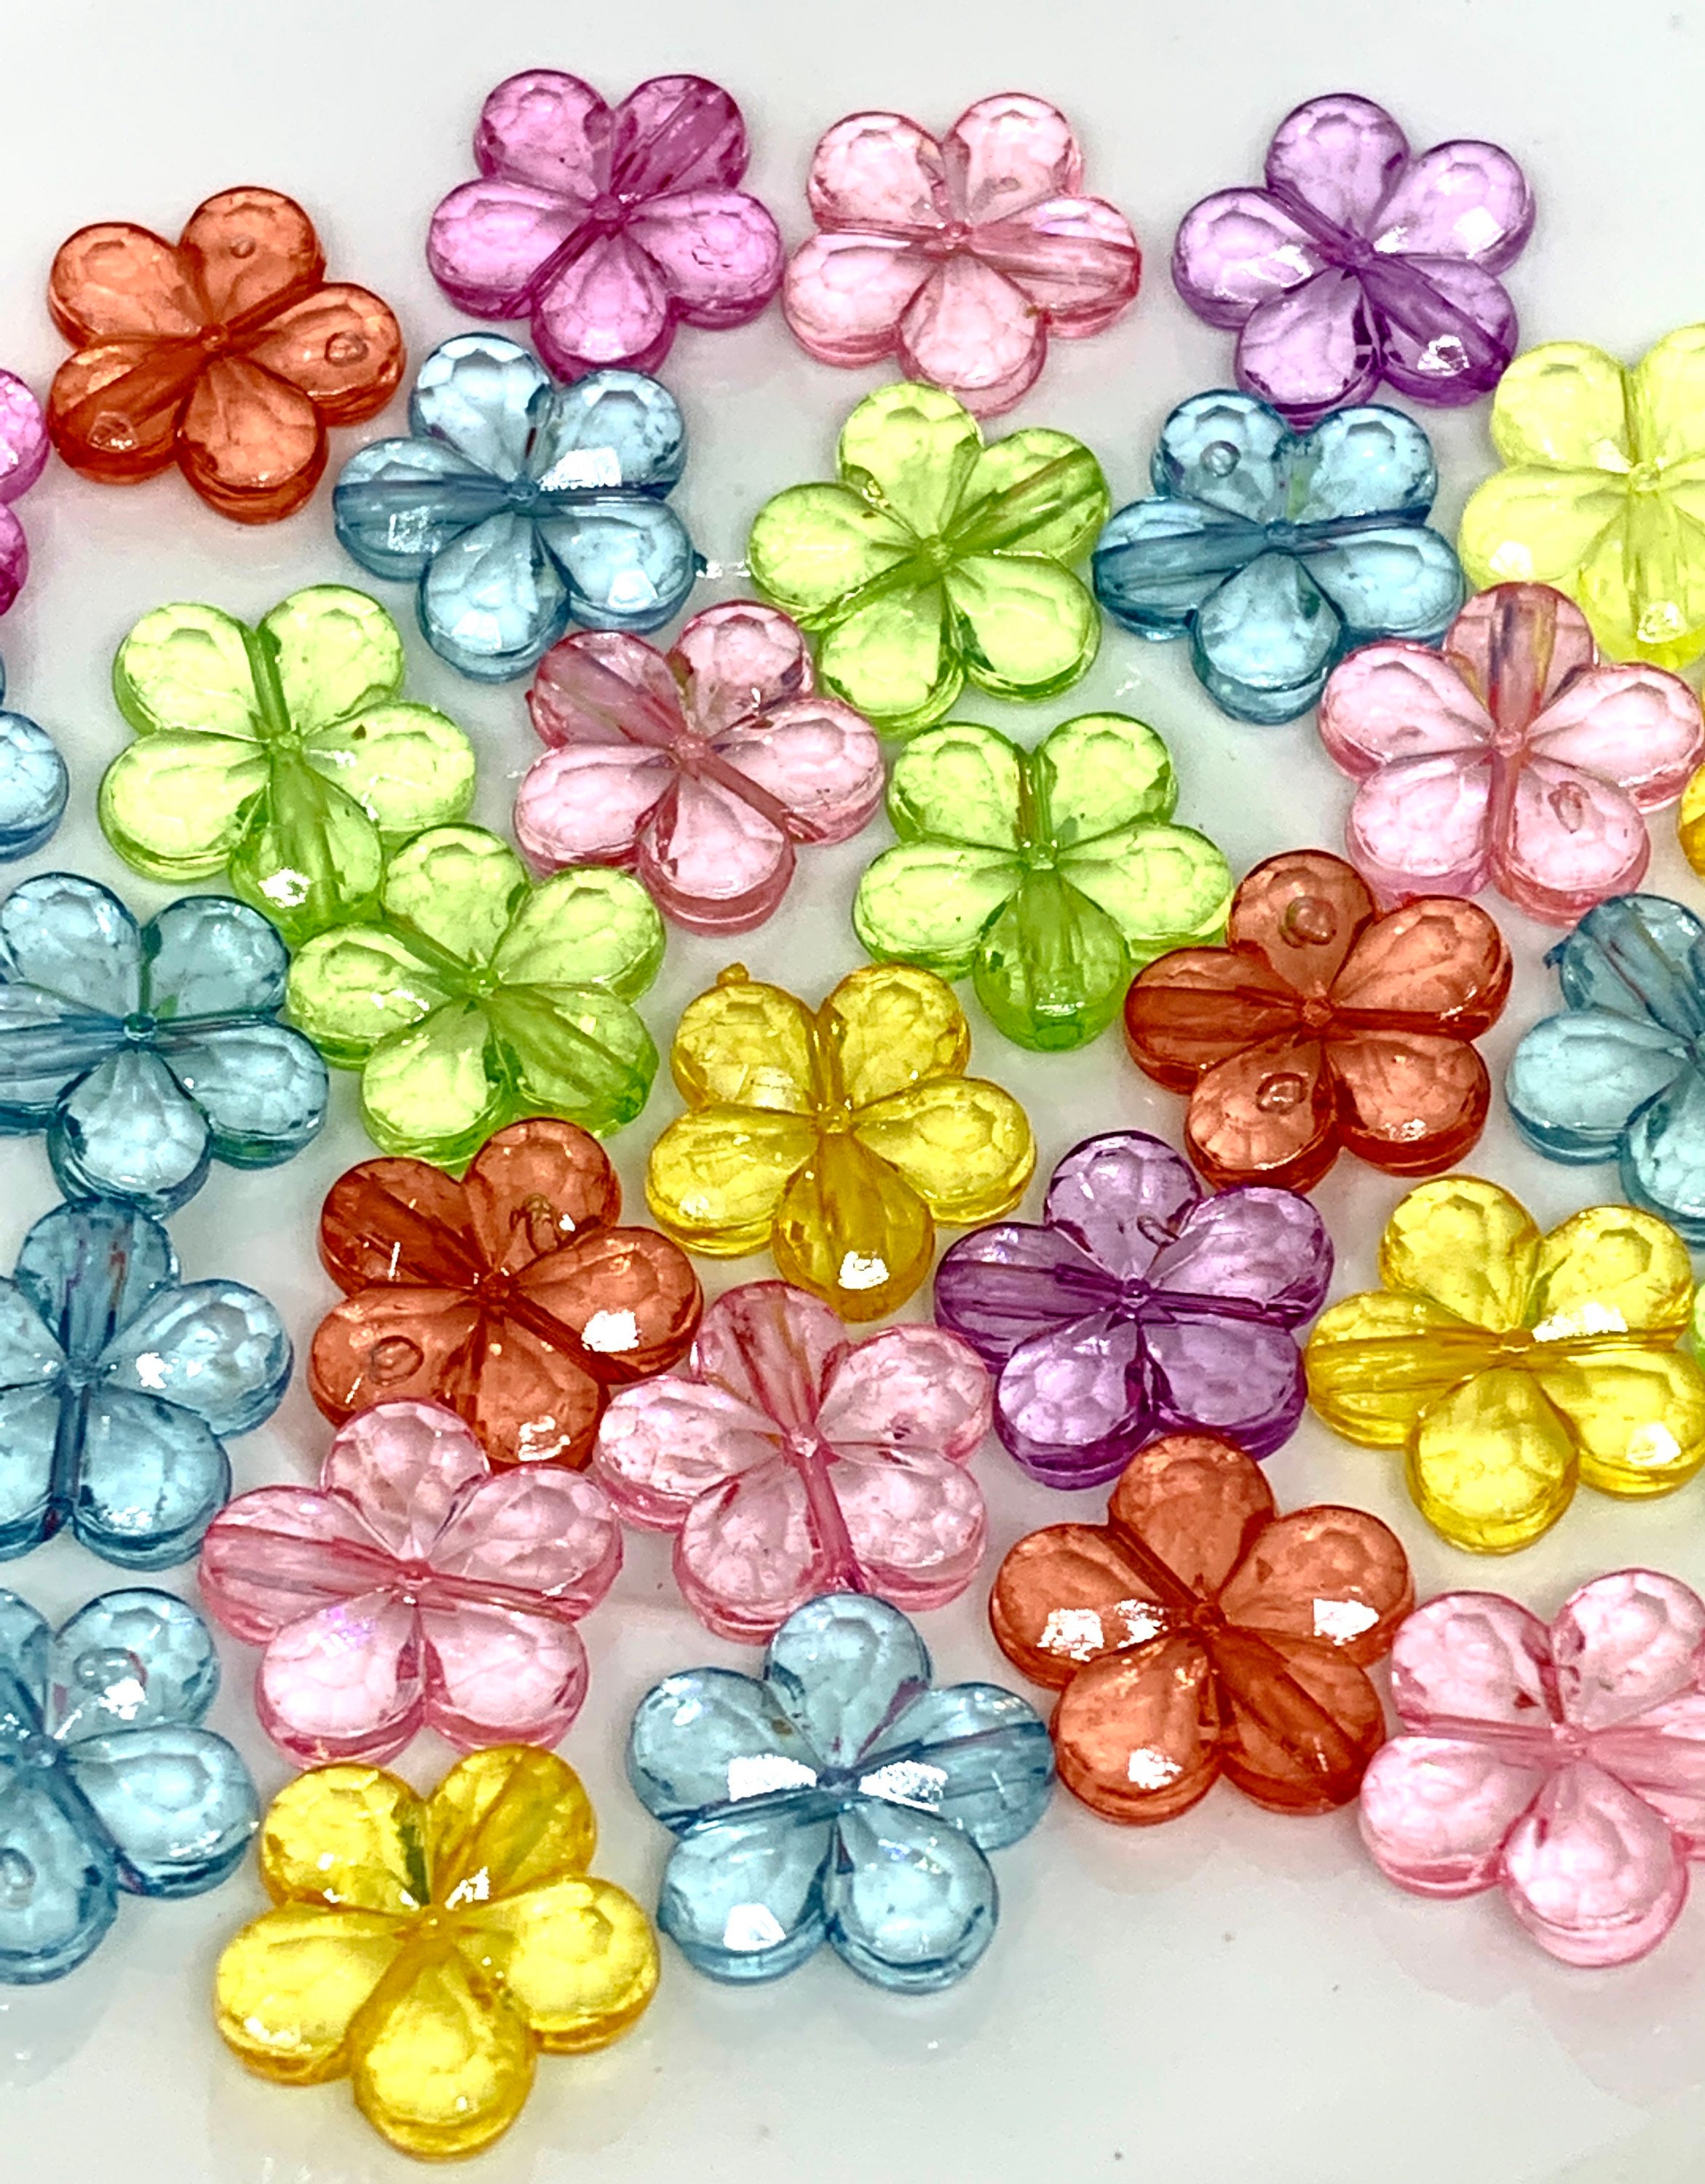 Cute Flower Beads, Translucent Beads, Clear Beads, Colorful Flower Beads,  14mm Beads, Flower Beads for Necklace, Beads for Bracelet